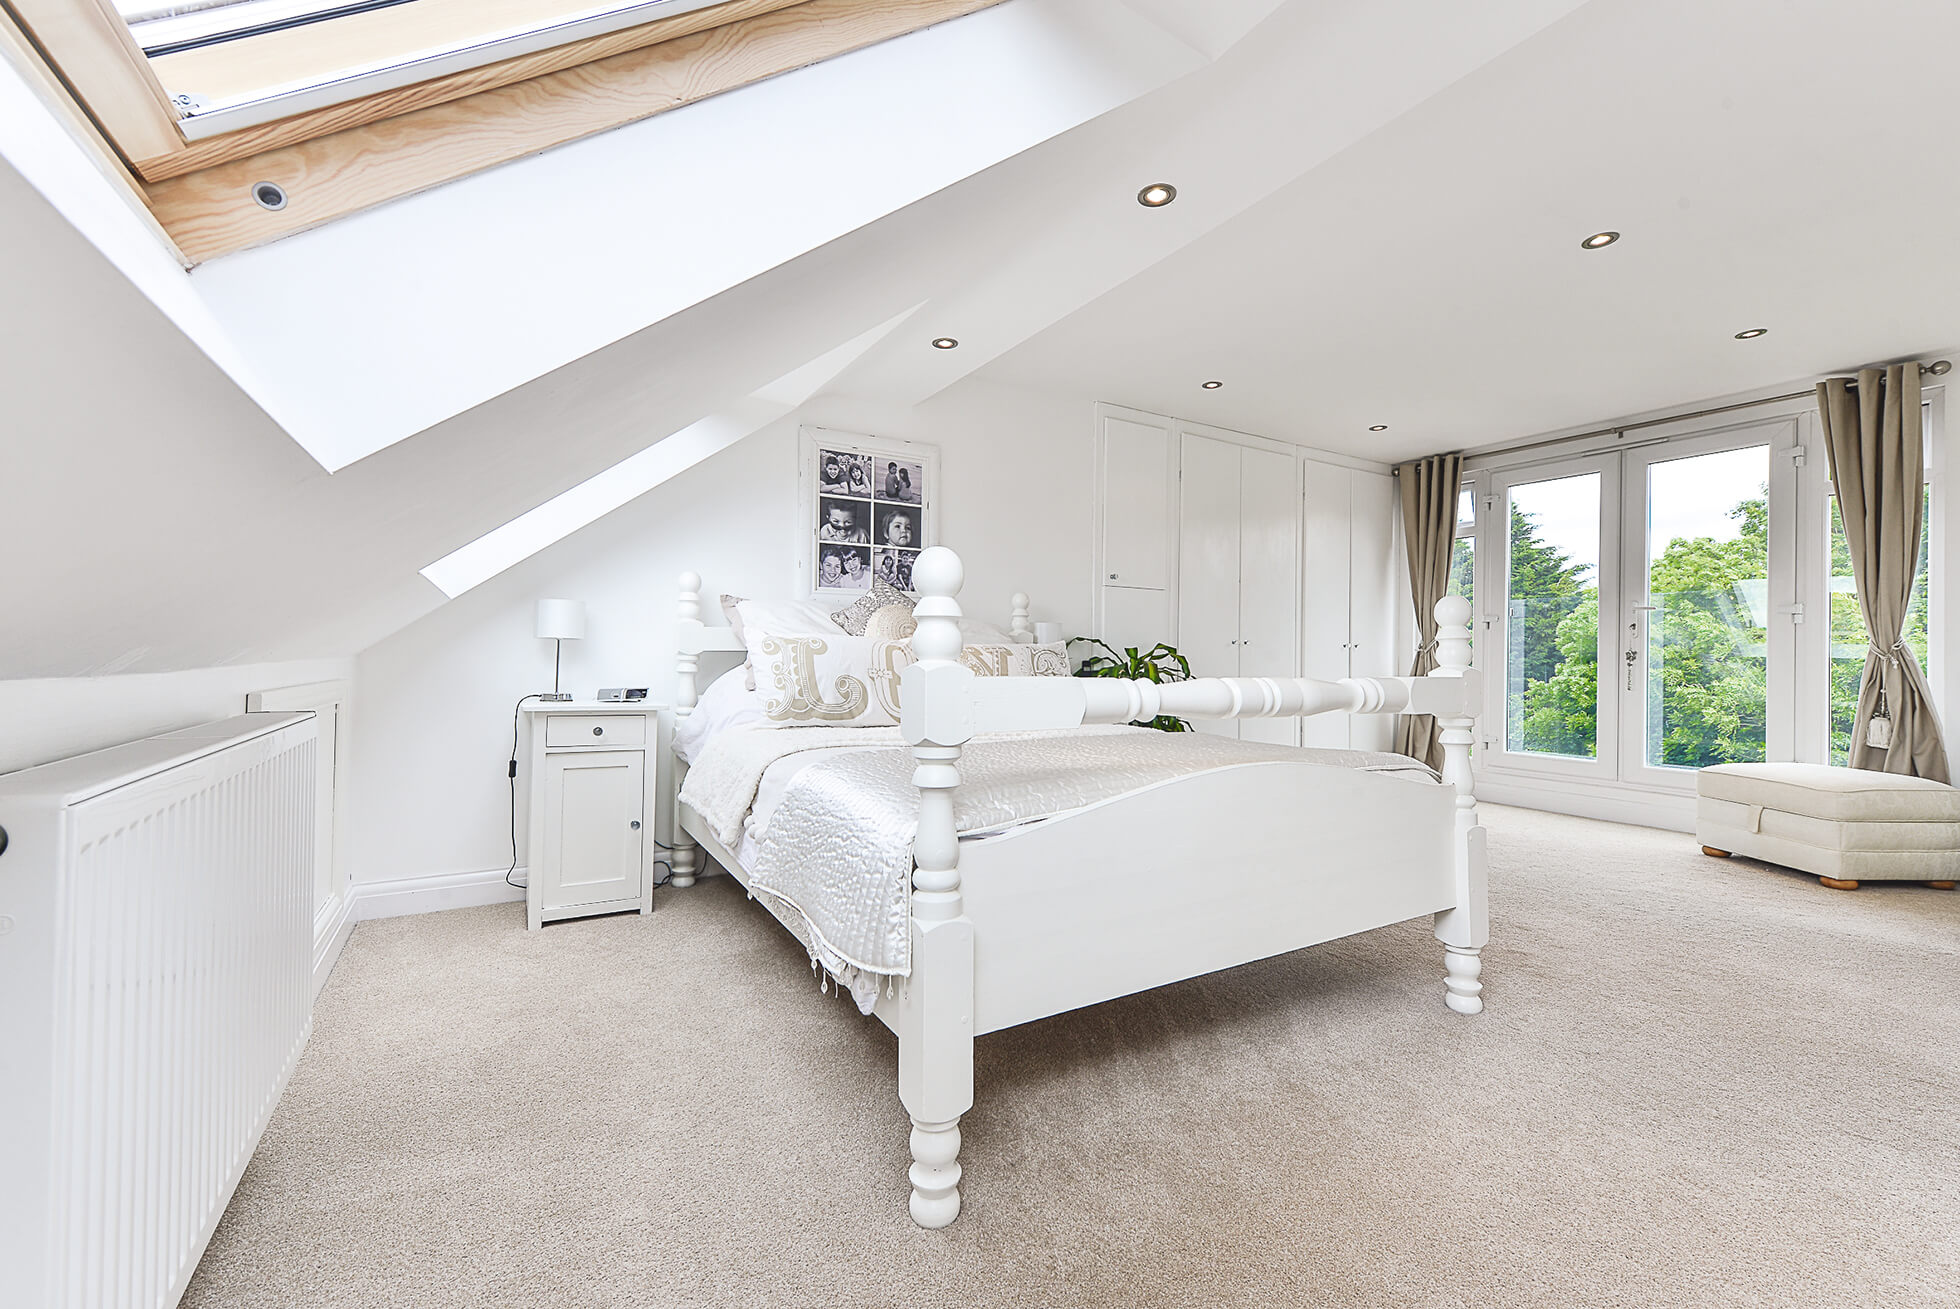 Do you have a question about converting your Loft in Hunton Bridge? Here are the most popular questions asked by our clients.